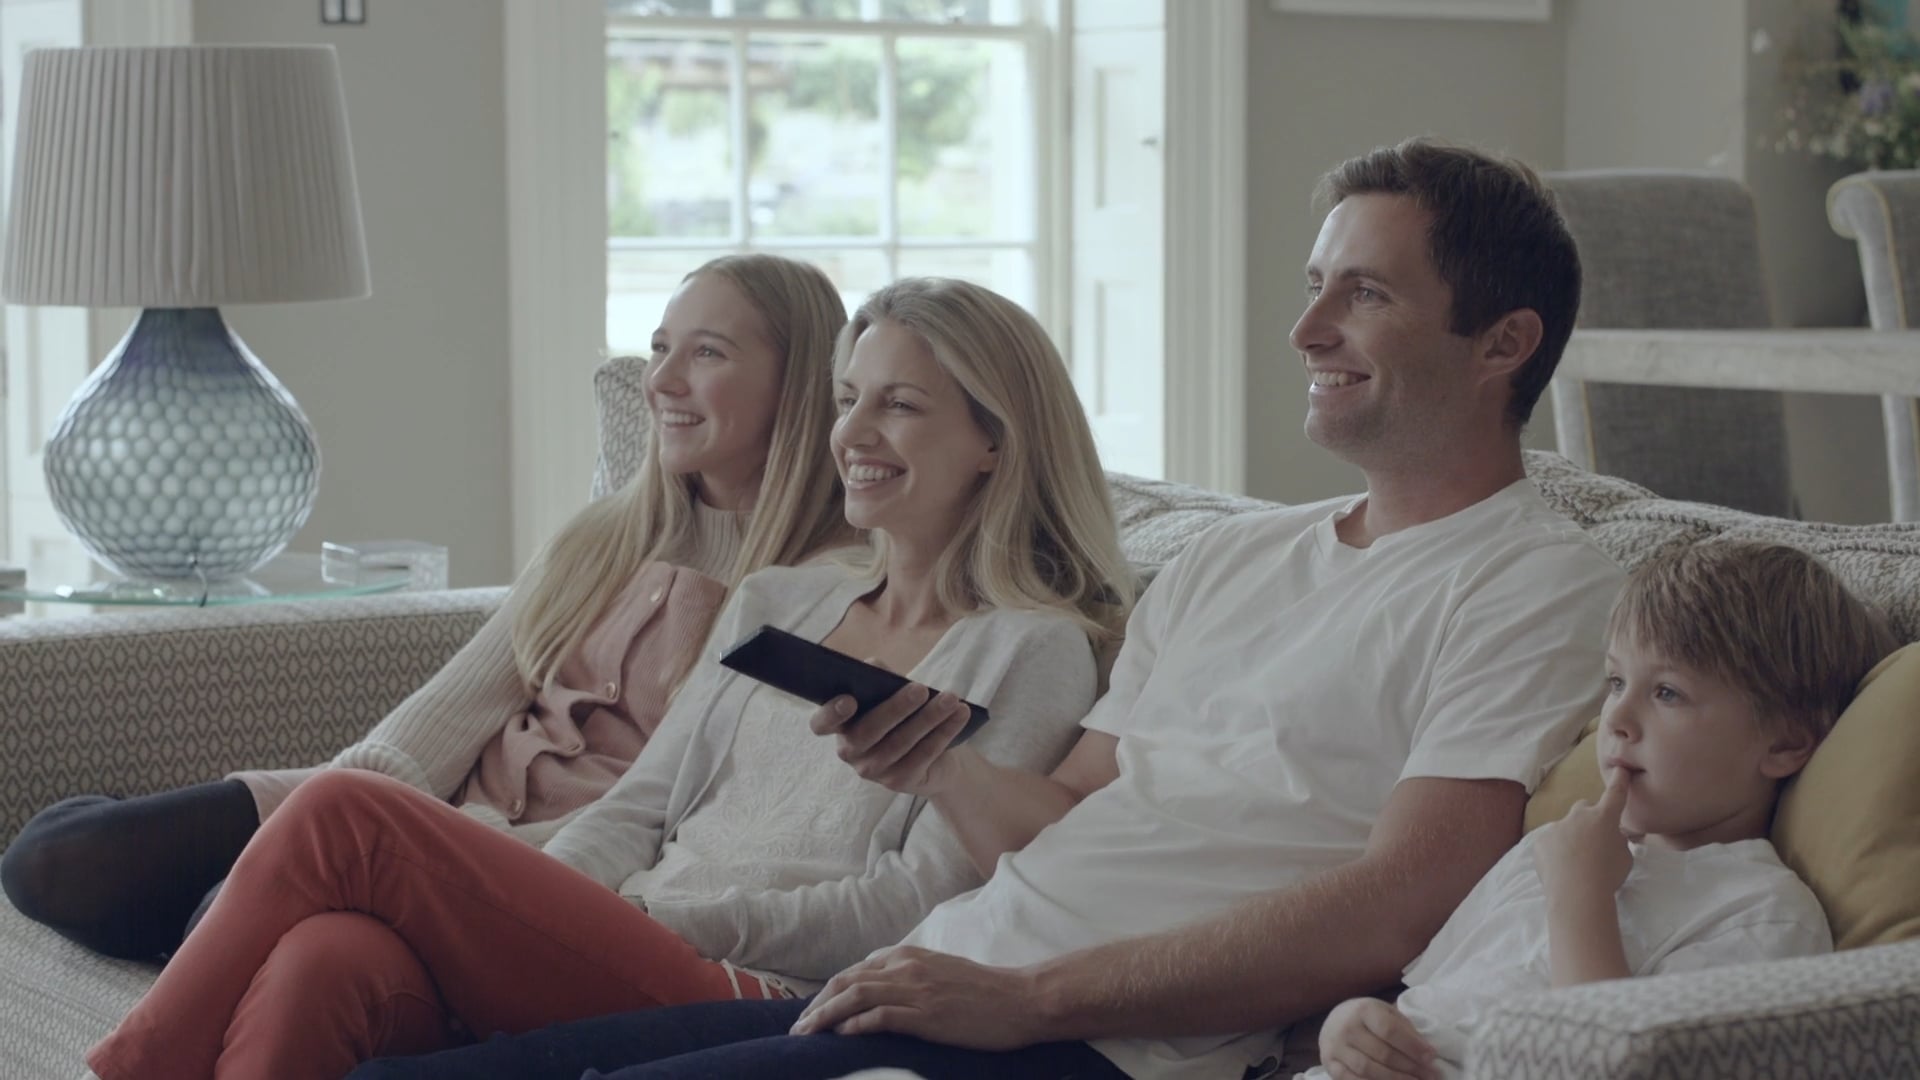 Crestron Home: Life, Elevated